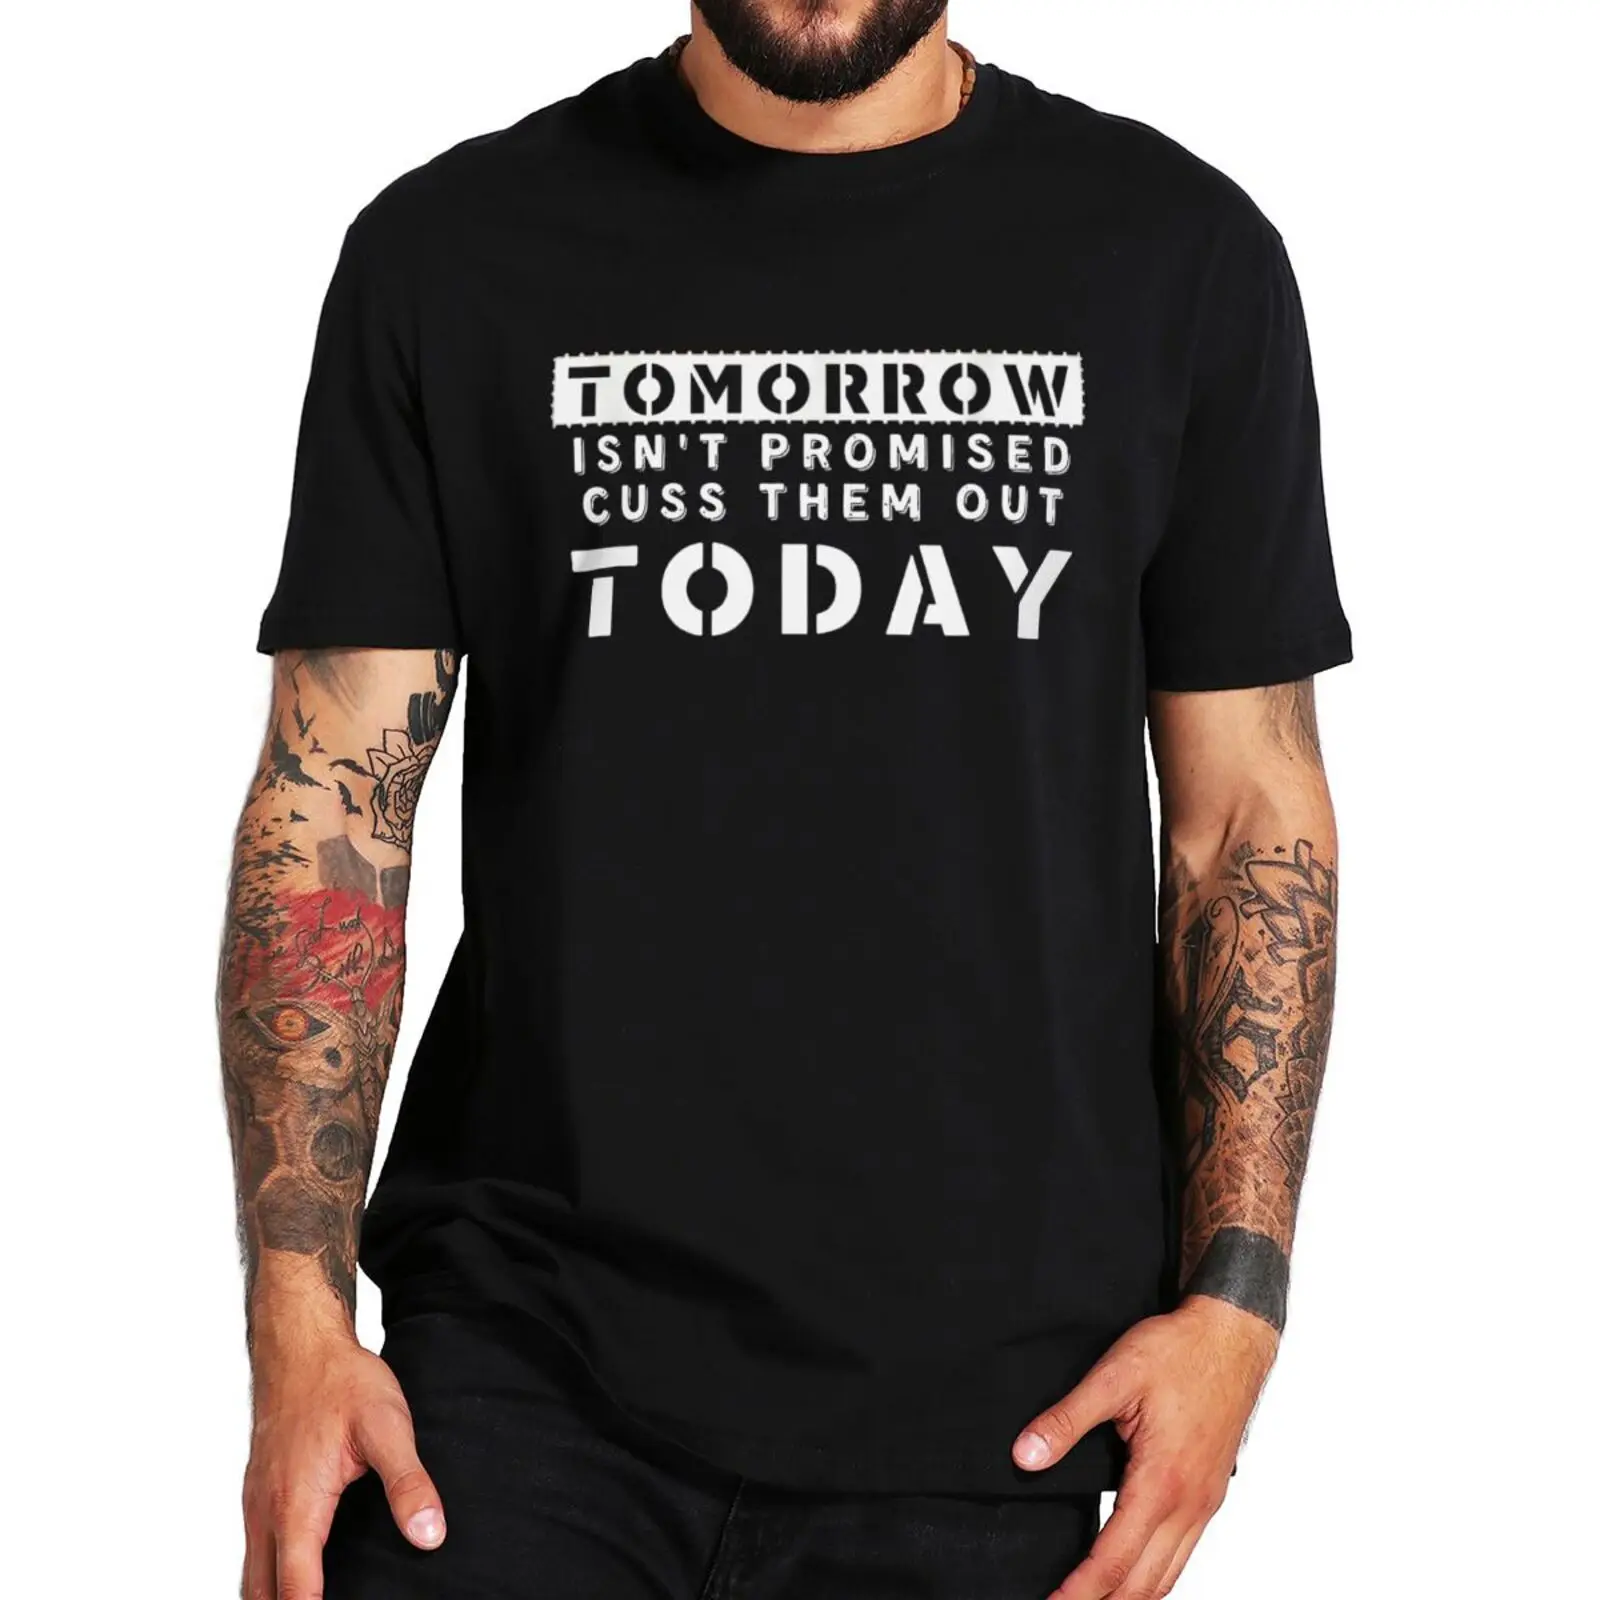 

Tomorrow Isn't Promised Cuss Them Out Today T-Shirt Funny Quote Jokes Memes Men Clothing EU Size Cotton Summer Soft T Shirts